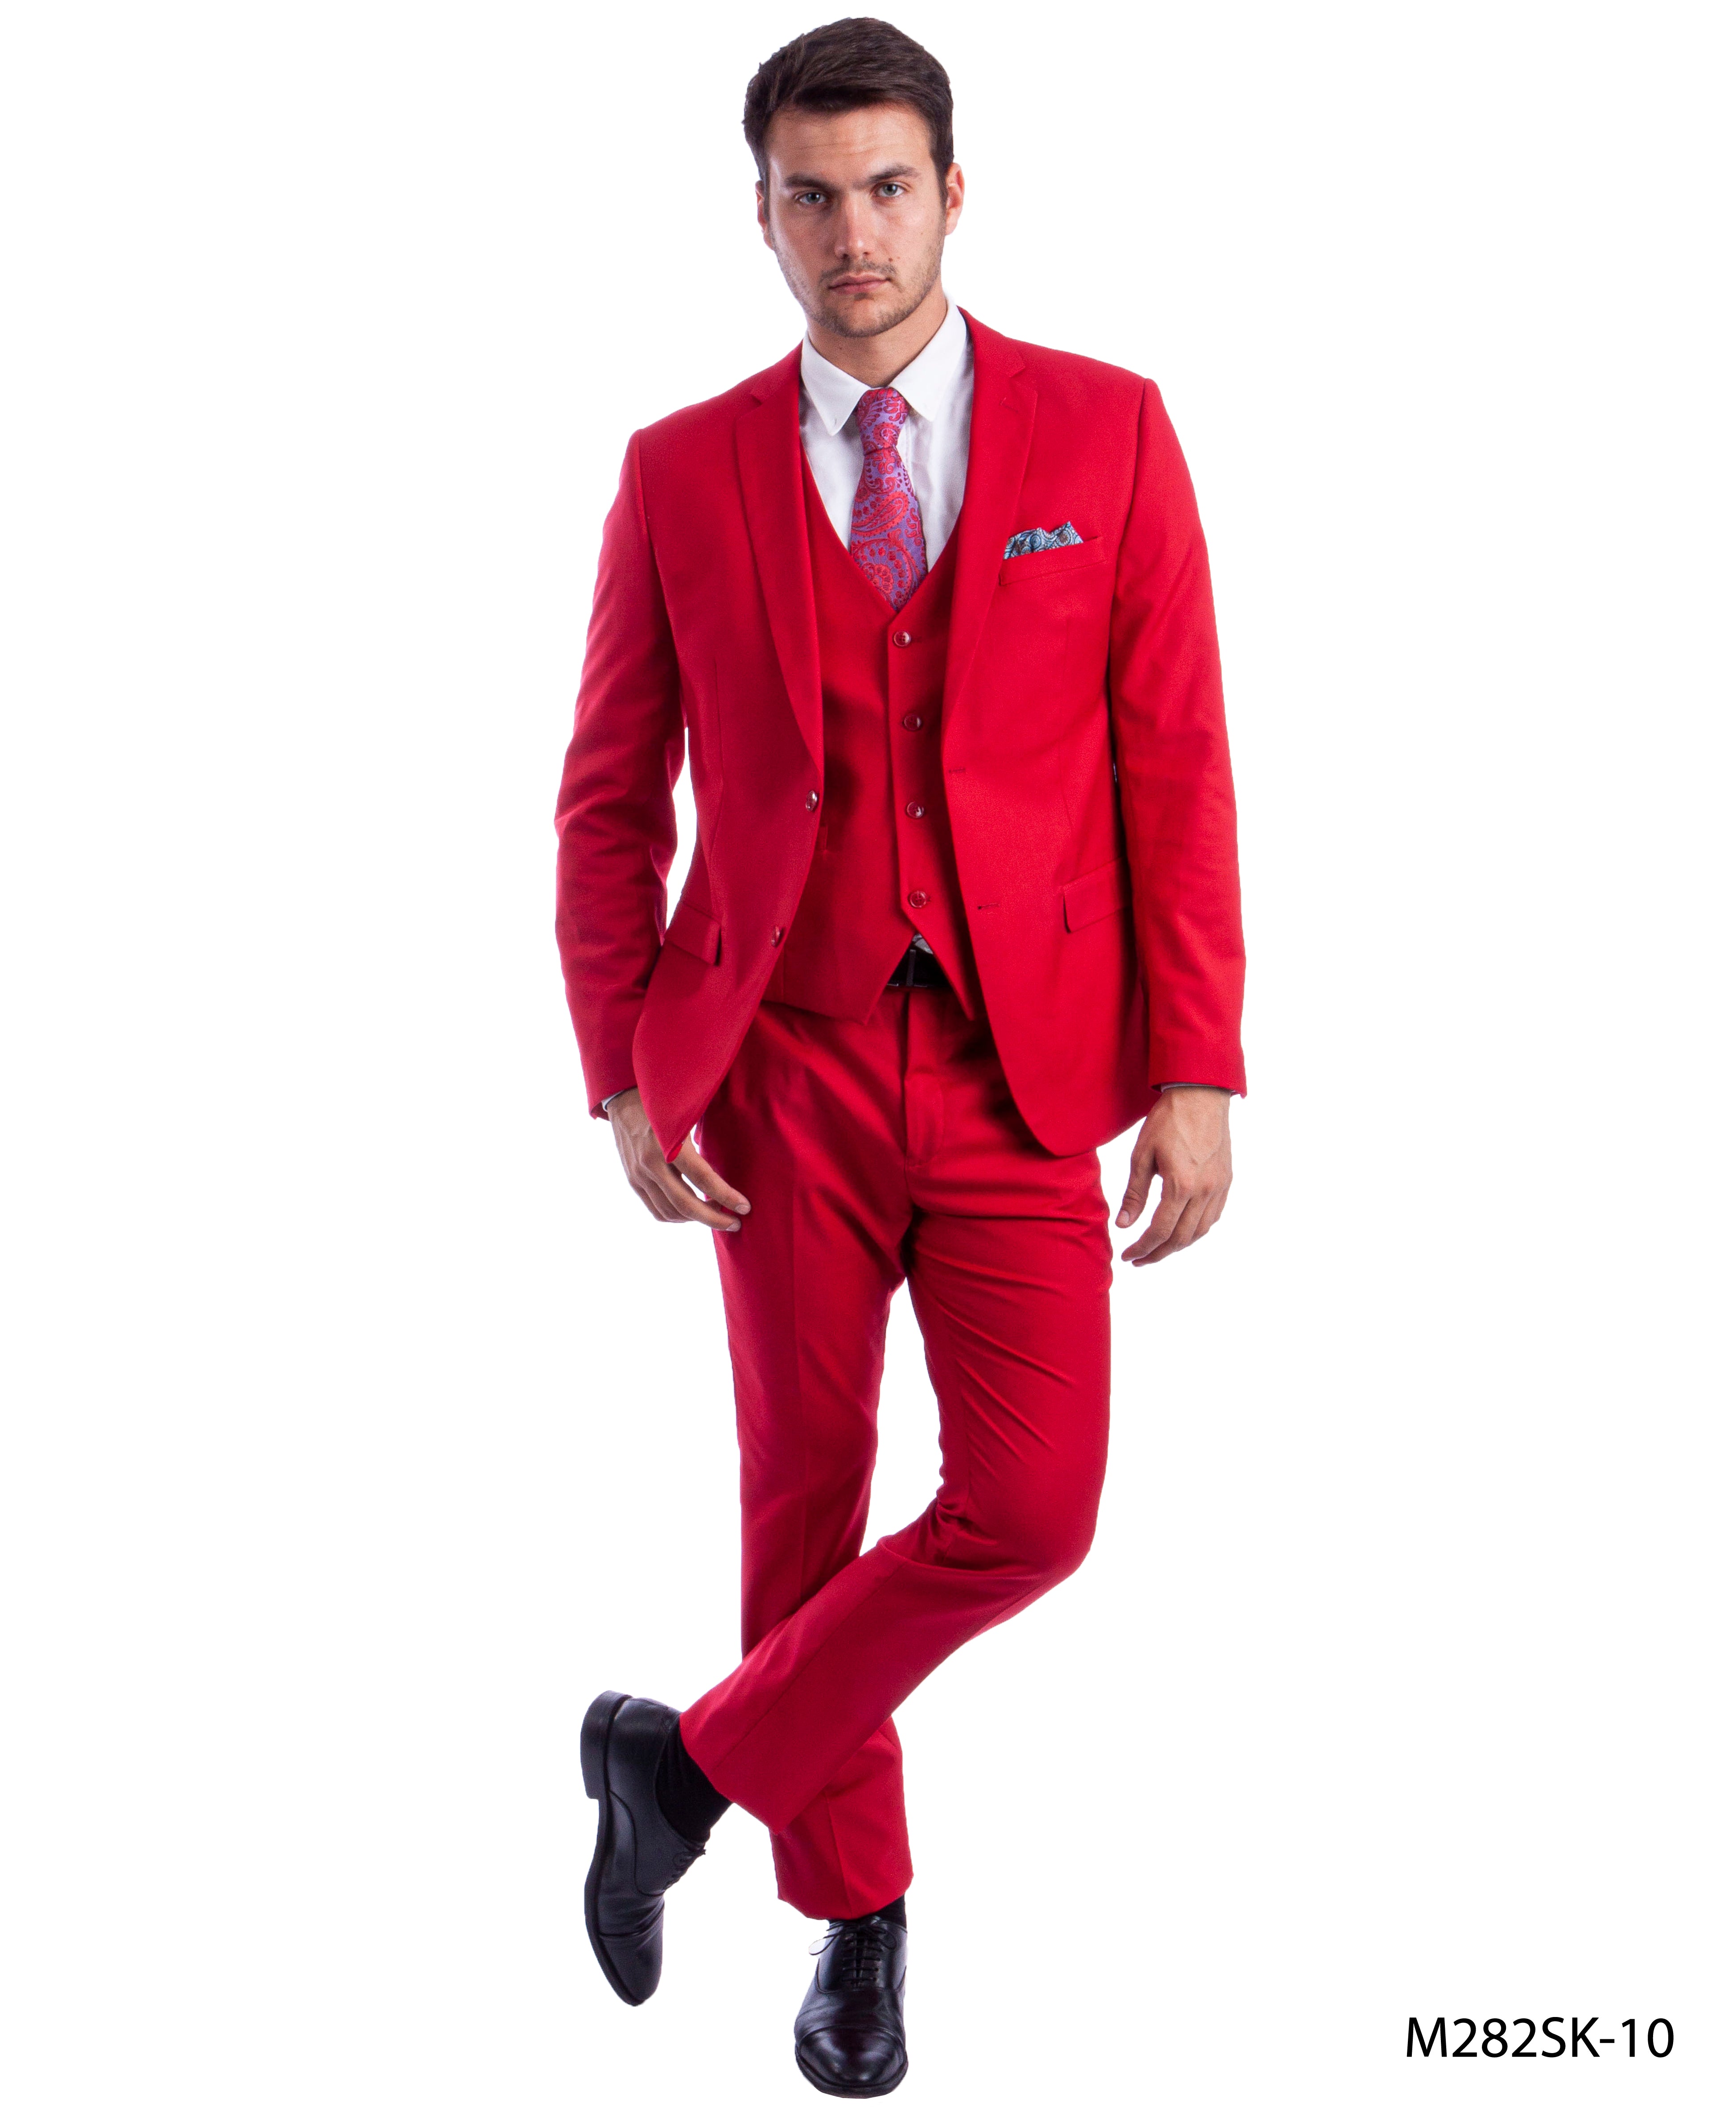 title:Sean Alexander Red 3 PC Solid Suit Skinny Fit Suits;color:Red